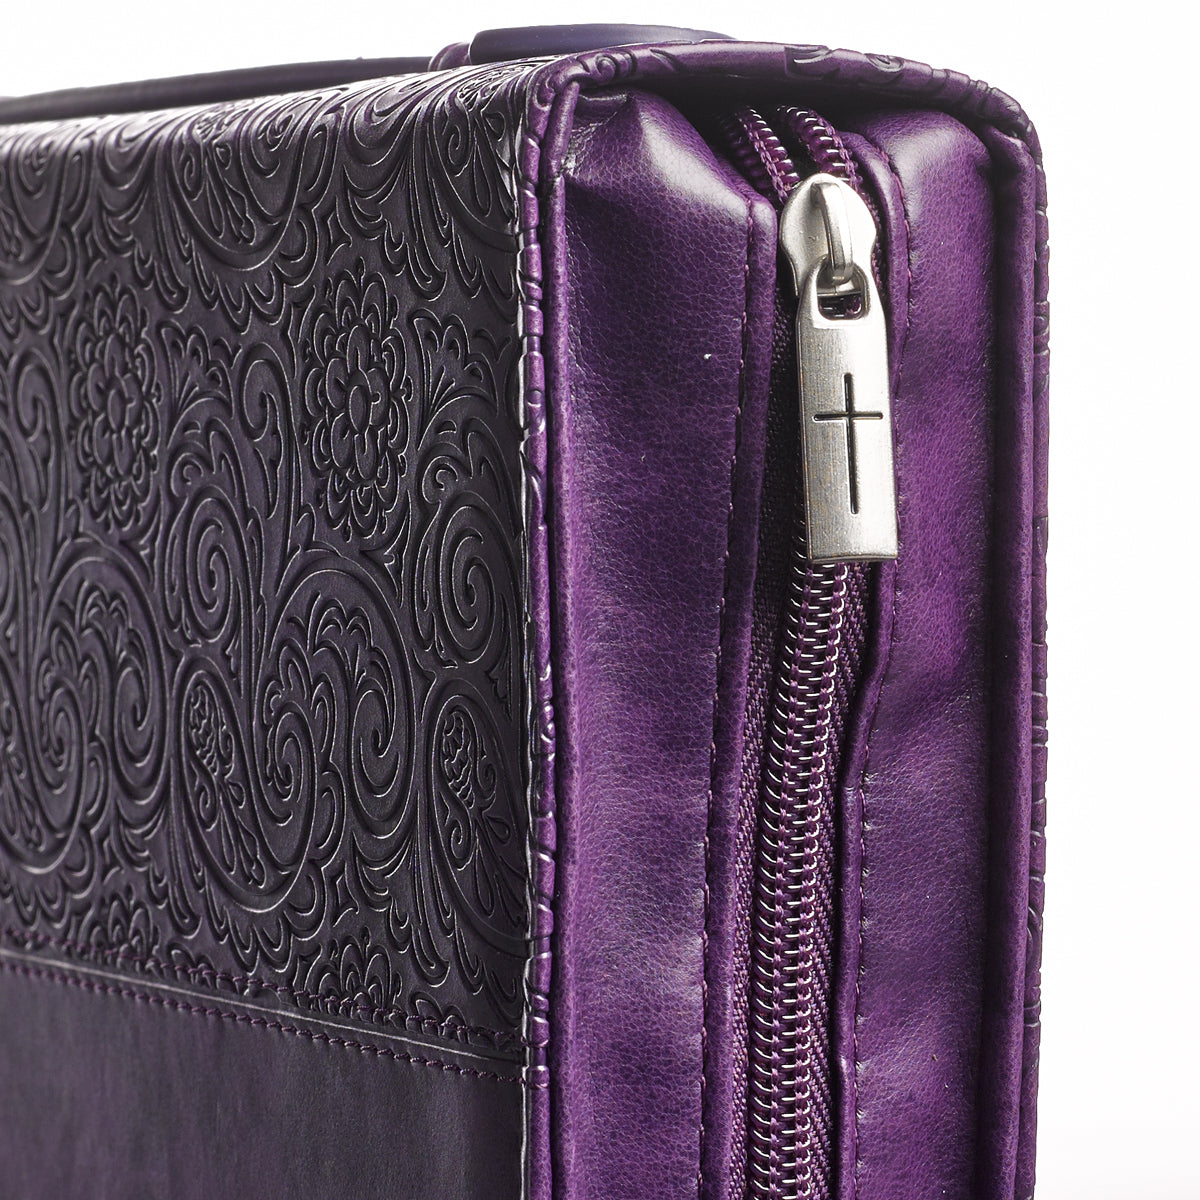 Faith Purple Faux Leather Fashion Bible Cover - Hebrews 11:1 - The Christian Gift Company